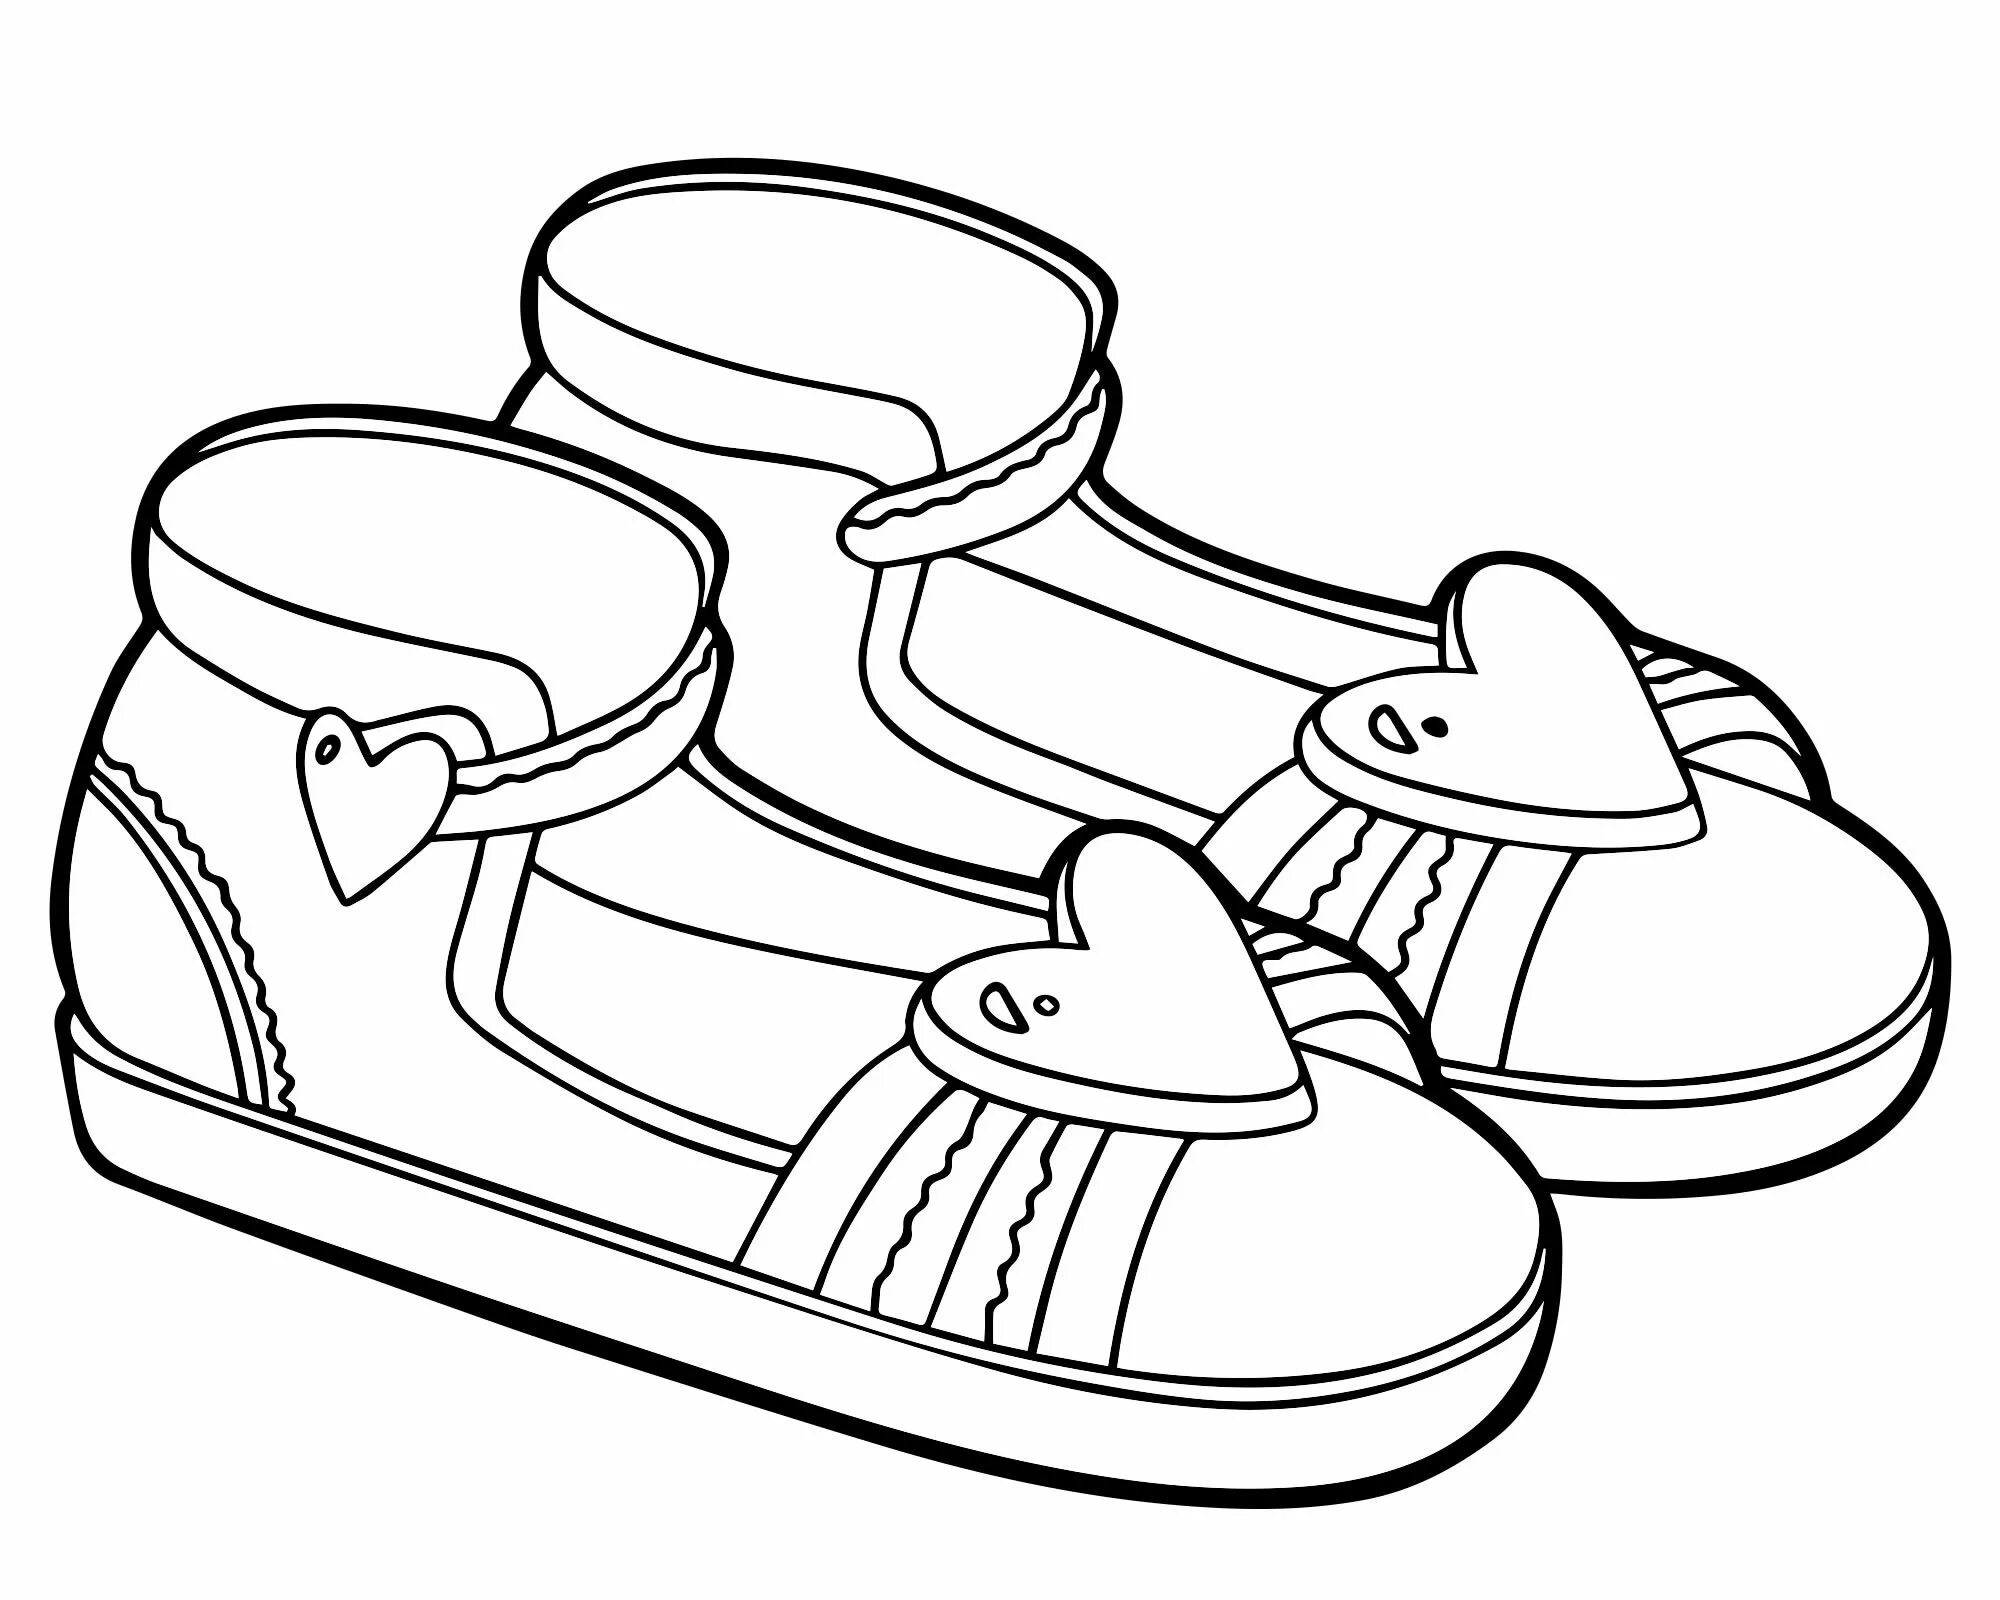 Coloring page glamor shoes for children 4-5 years old